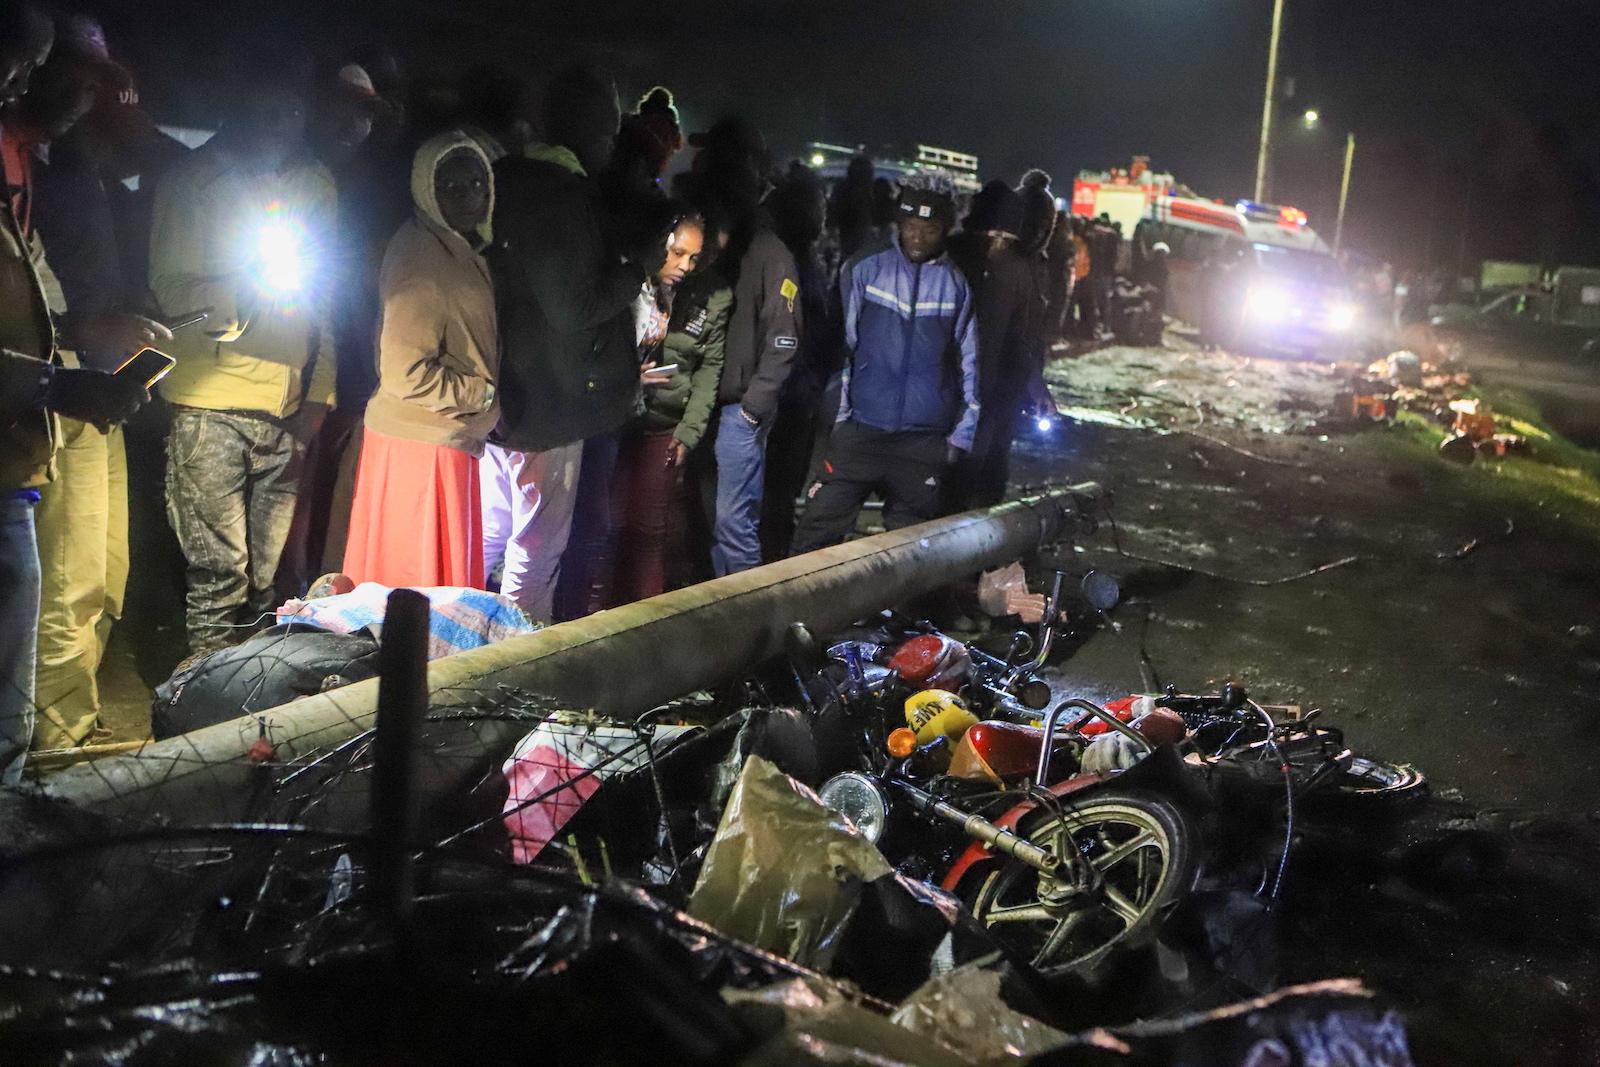 epa10720199 People mill around and search through the aftermath of a traffic accident in Londiani Junction area along the Kericho-Nakuru highway in Kericho County, Kenya's Rift Valley region, Kenya, 01 July 2023. According to a statement from Regional police commander Tom Odera, at least 48 people have been confirmed dead in the road accident, during which a truck carrying a shipping container rammed into several other vehicles and market traders along the Nakuru-Kericho highway.  EPA/STR